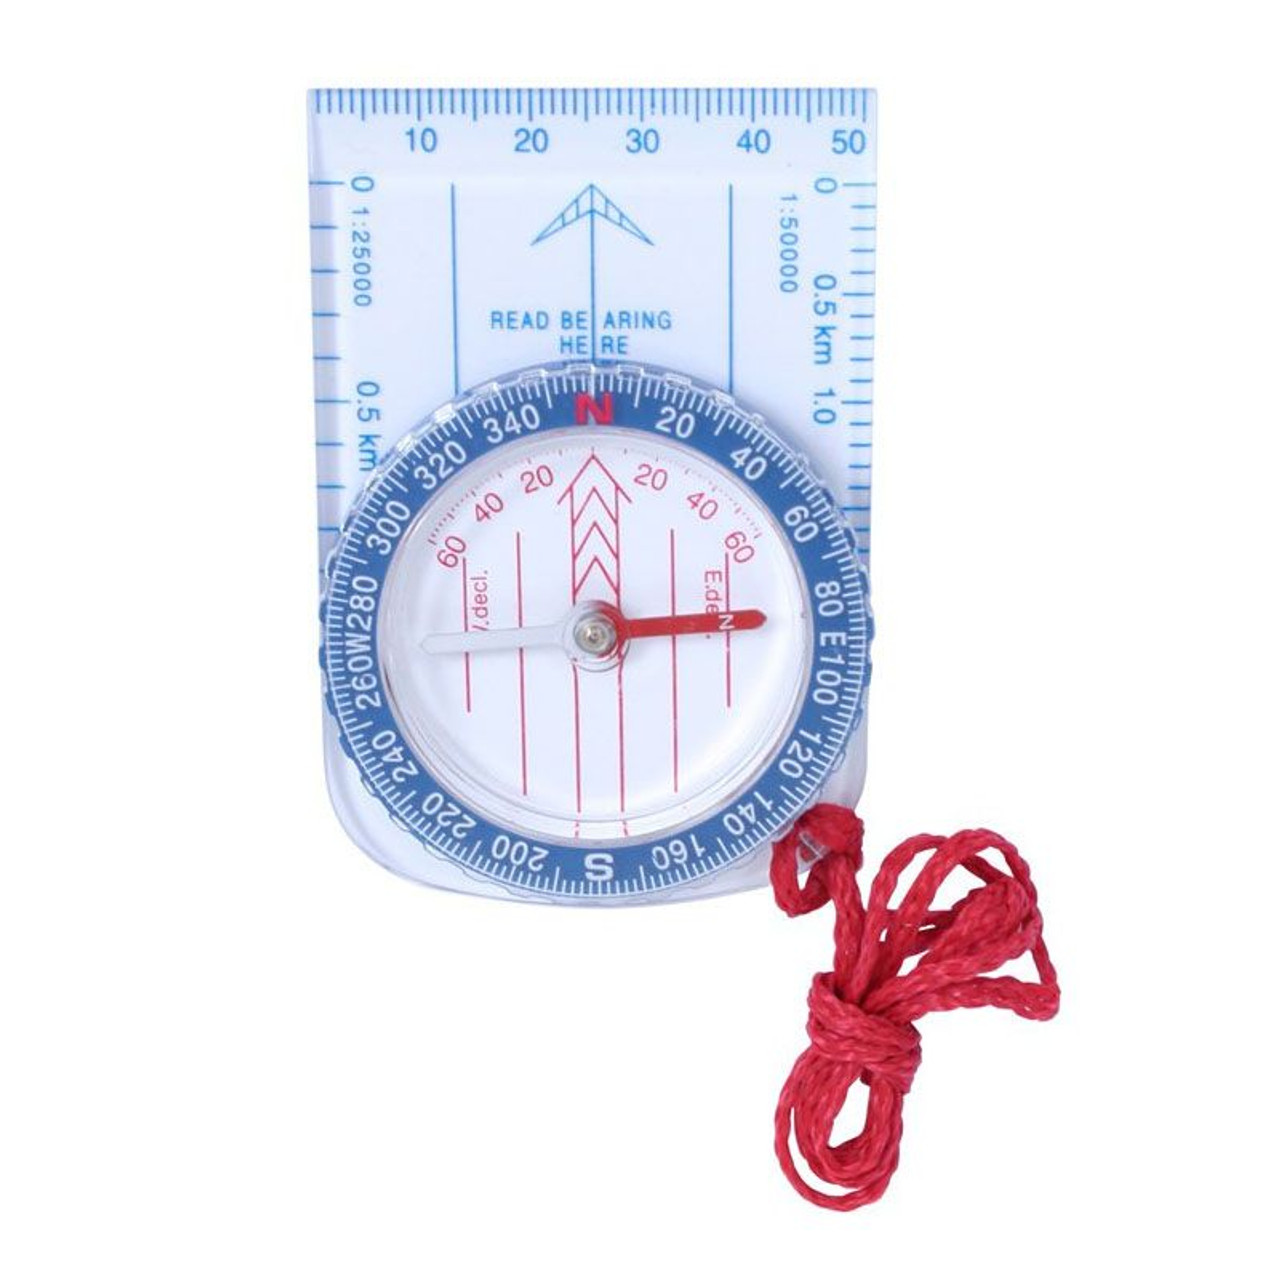 Eagle Map Compass Navigation Reading with Mirror Lanyard 1 3/4" Diameter Dial Lanyard Professional Map Compass Compass Magnetic Directional Map Positioning with Easy Readability